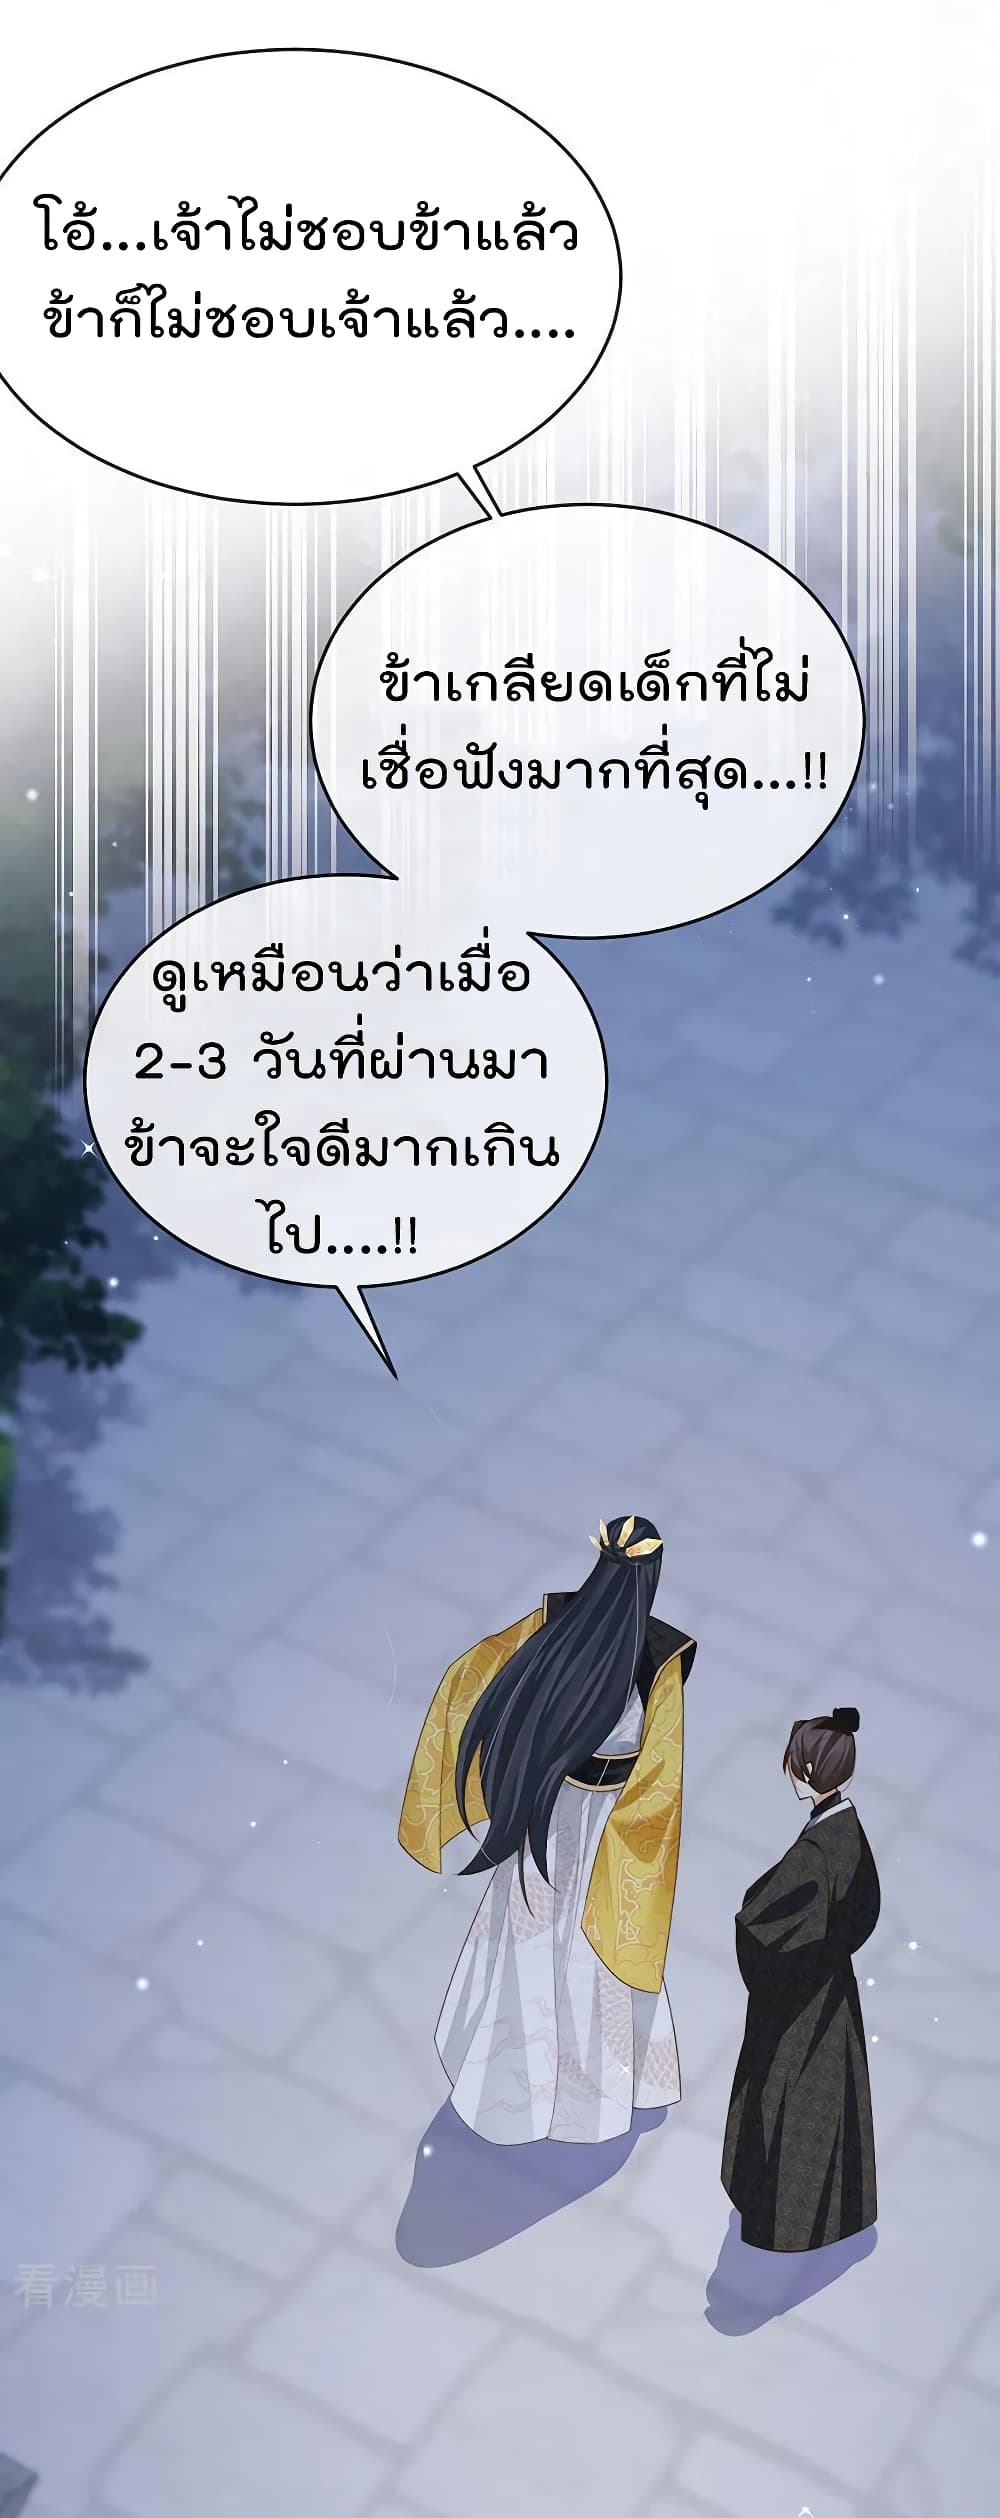 One Hundred Ways to Abuse Scum ตอนที่ 58 (18)